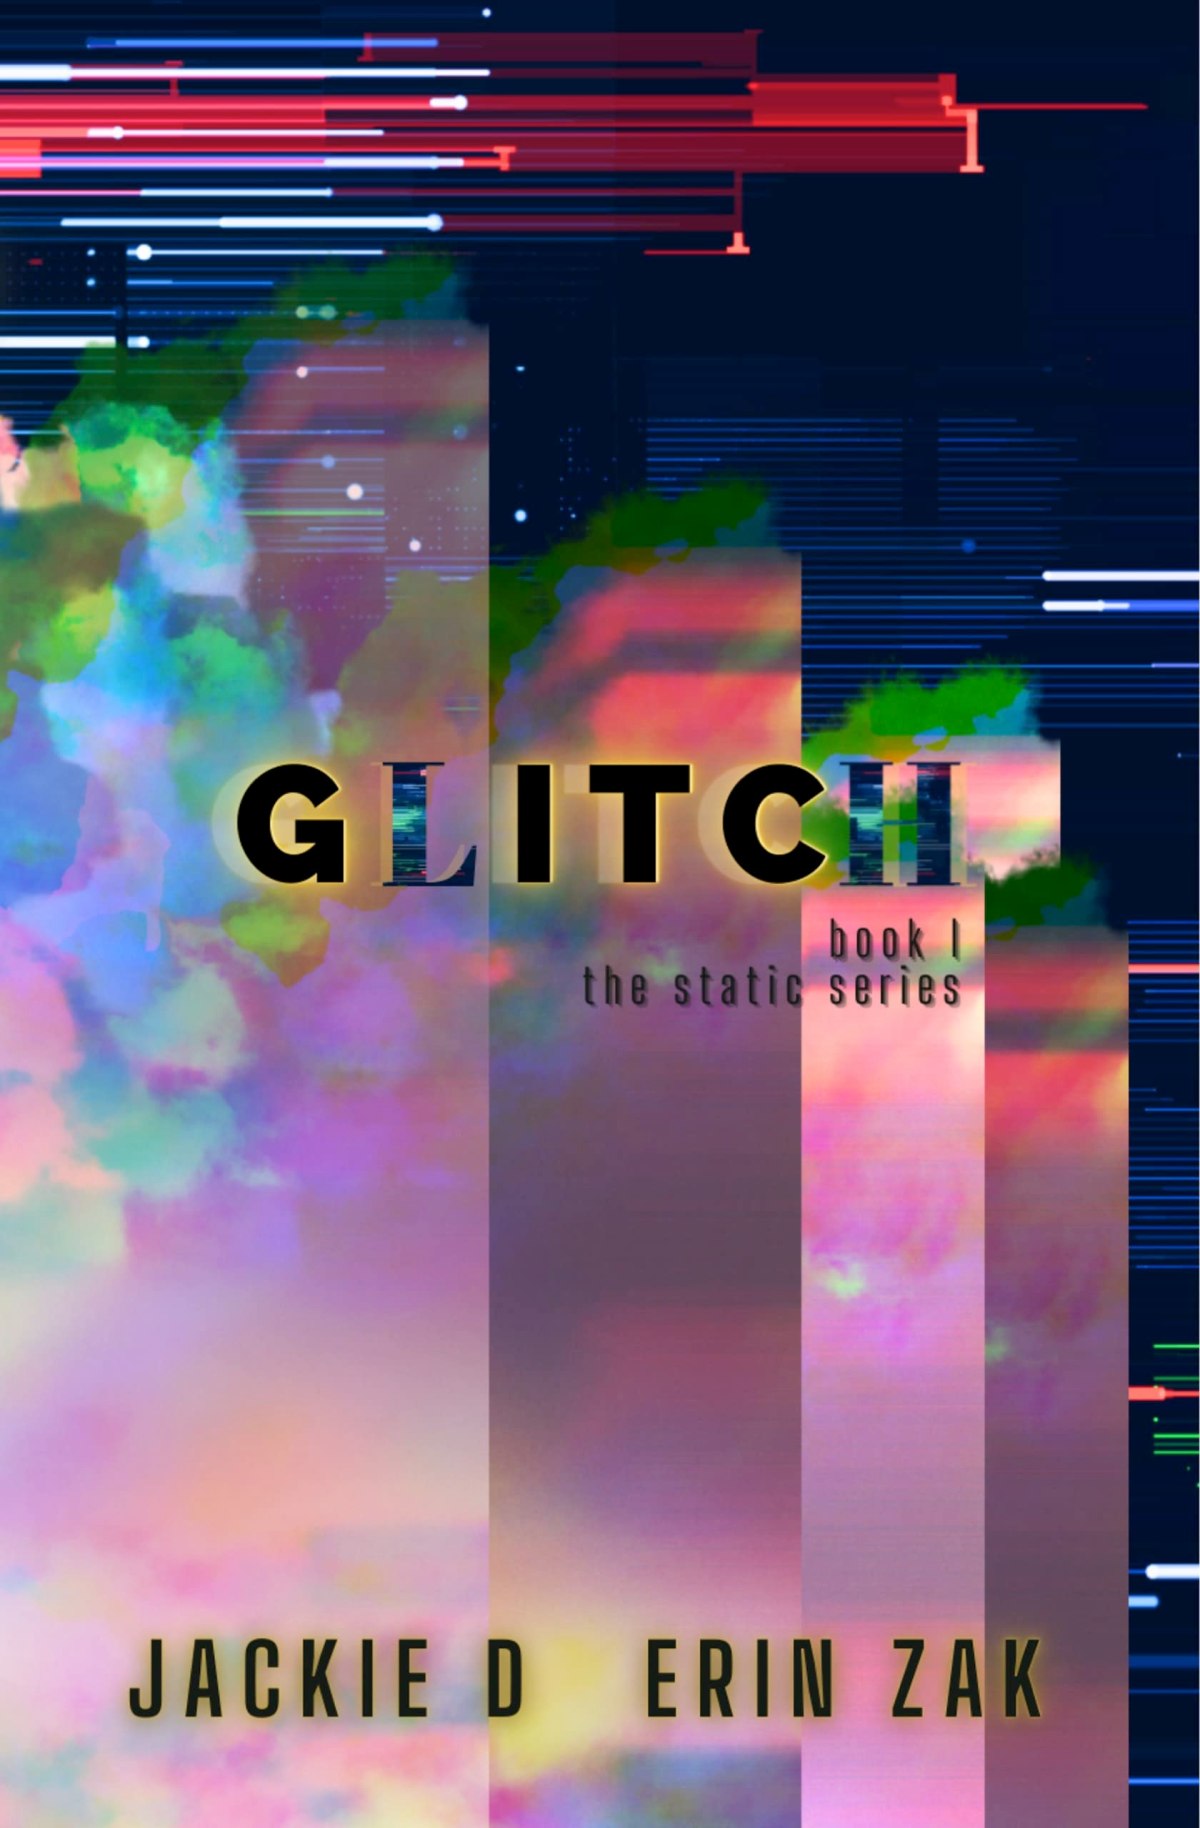 5* Review: Glitch – Jackie D. and Erin Zak